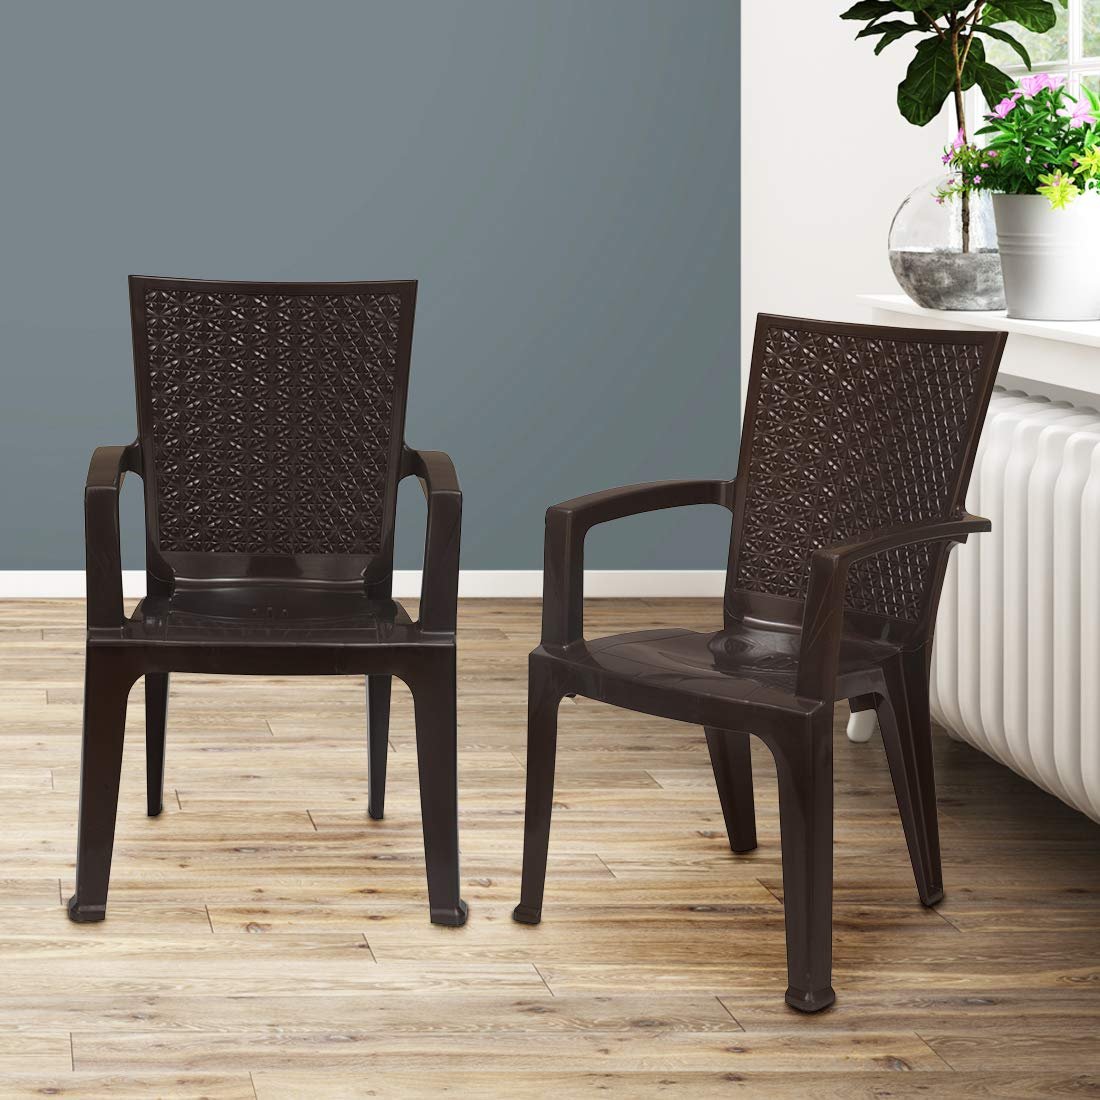 Nilkamal Chr2225 Plastic Mid Back With Arm Chair | Chairs For Home| Dining Room| Bedroom| Kitchen| Living Room|Office - Outdoor - Garden|Dust Free |100% Polypropylene Stackable Chairs|Brown|Set Of 2